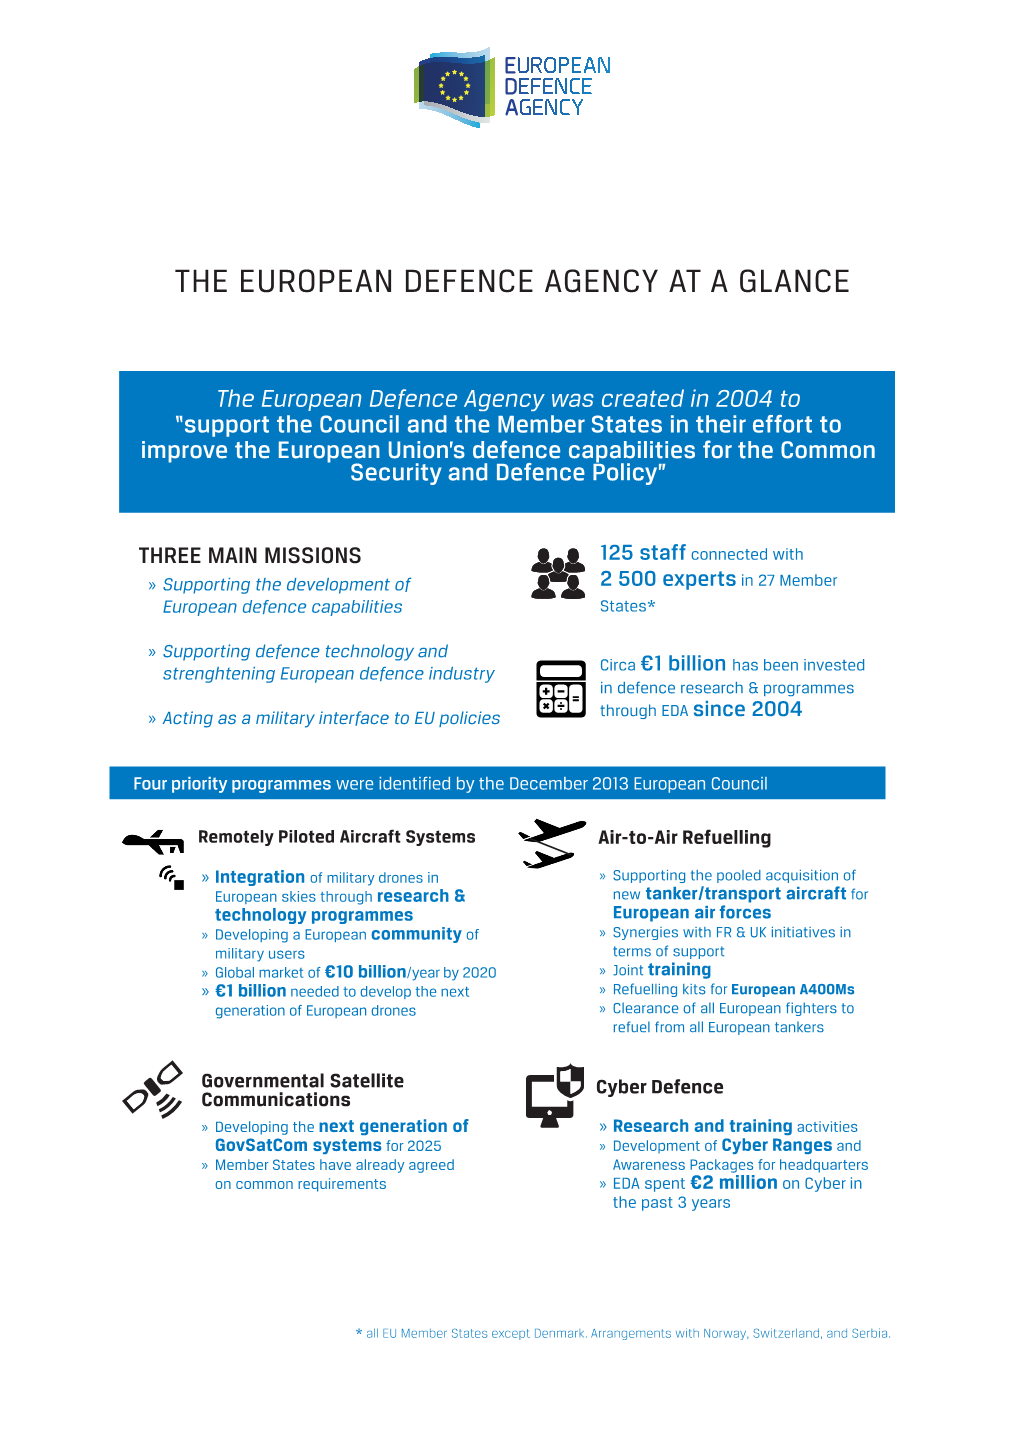 The European Defence Agency at a Glance